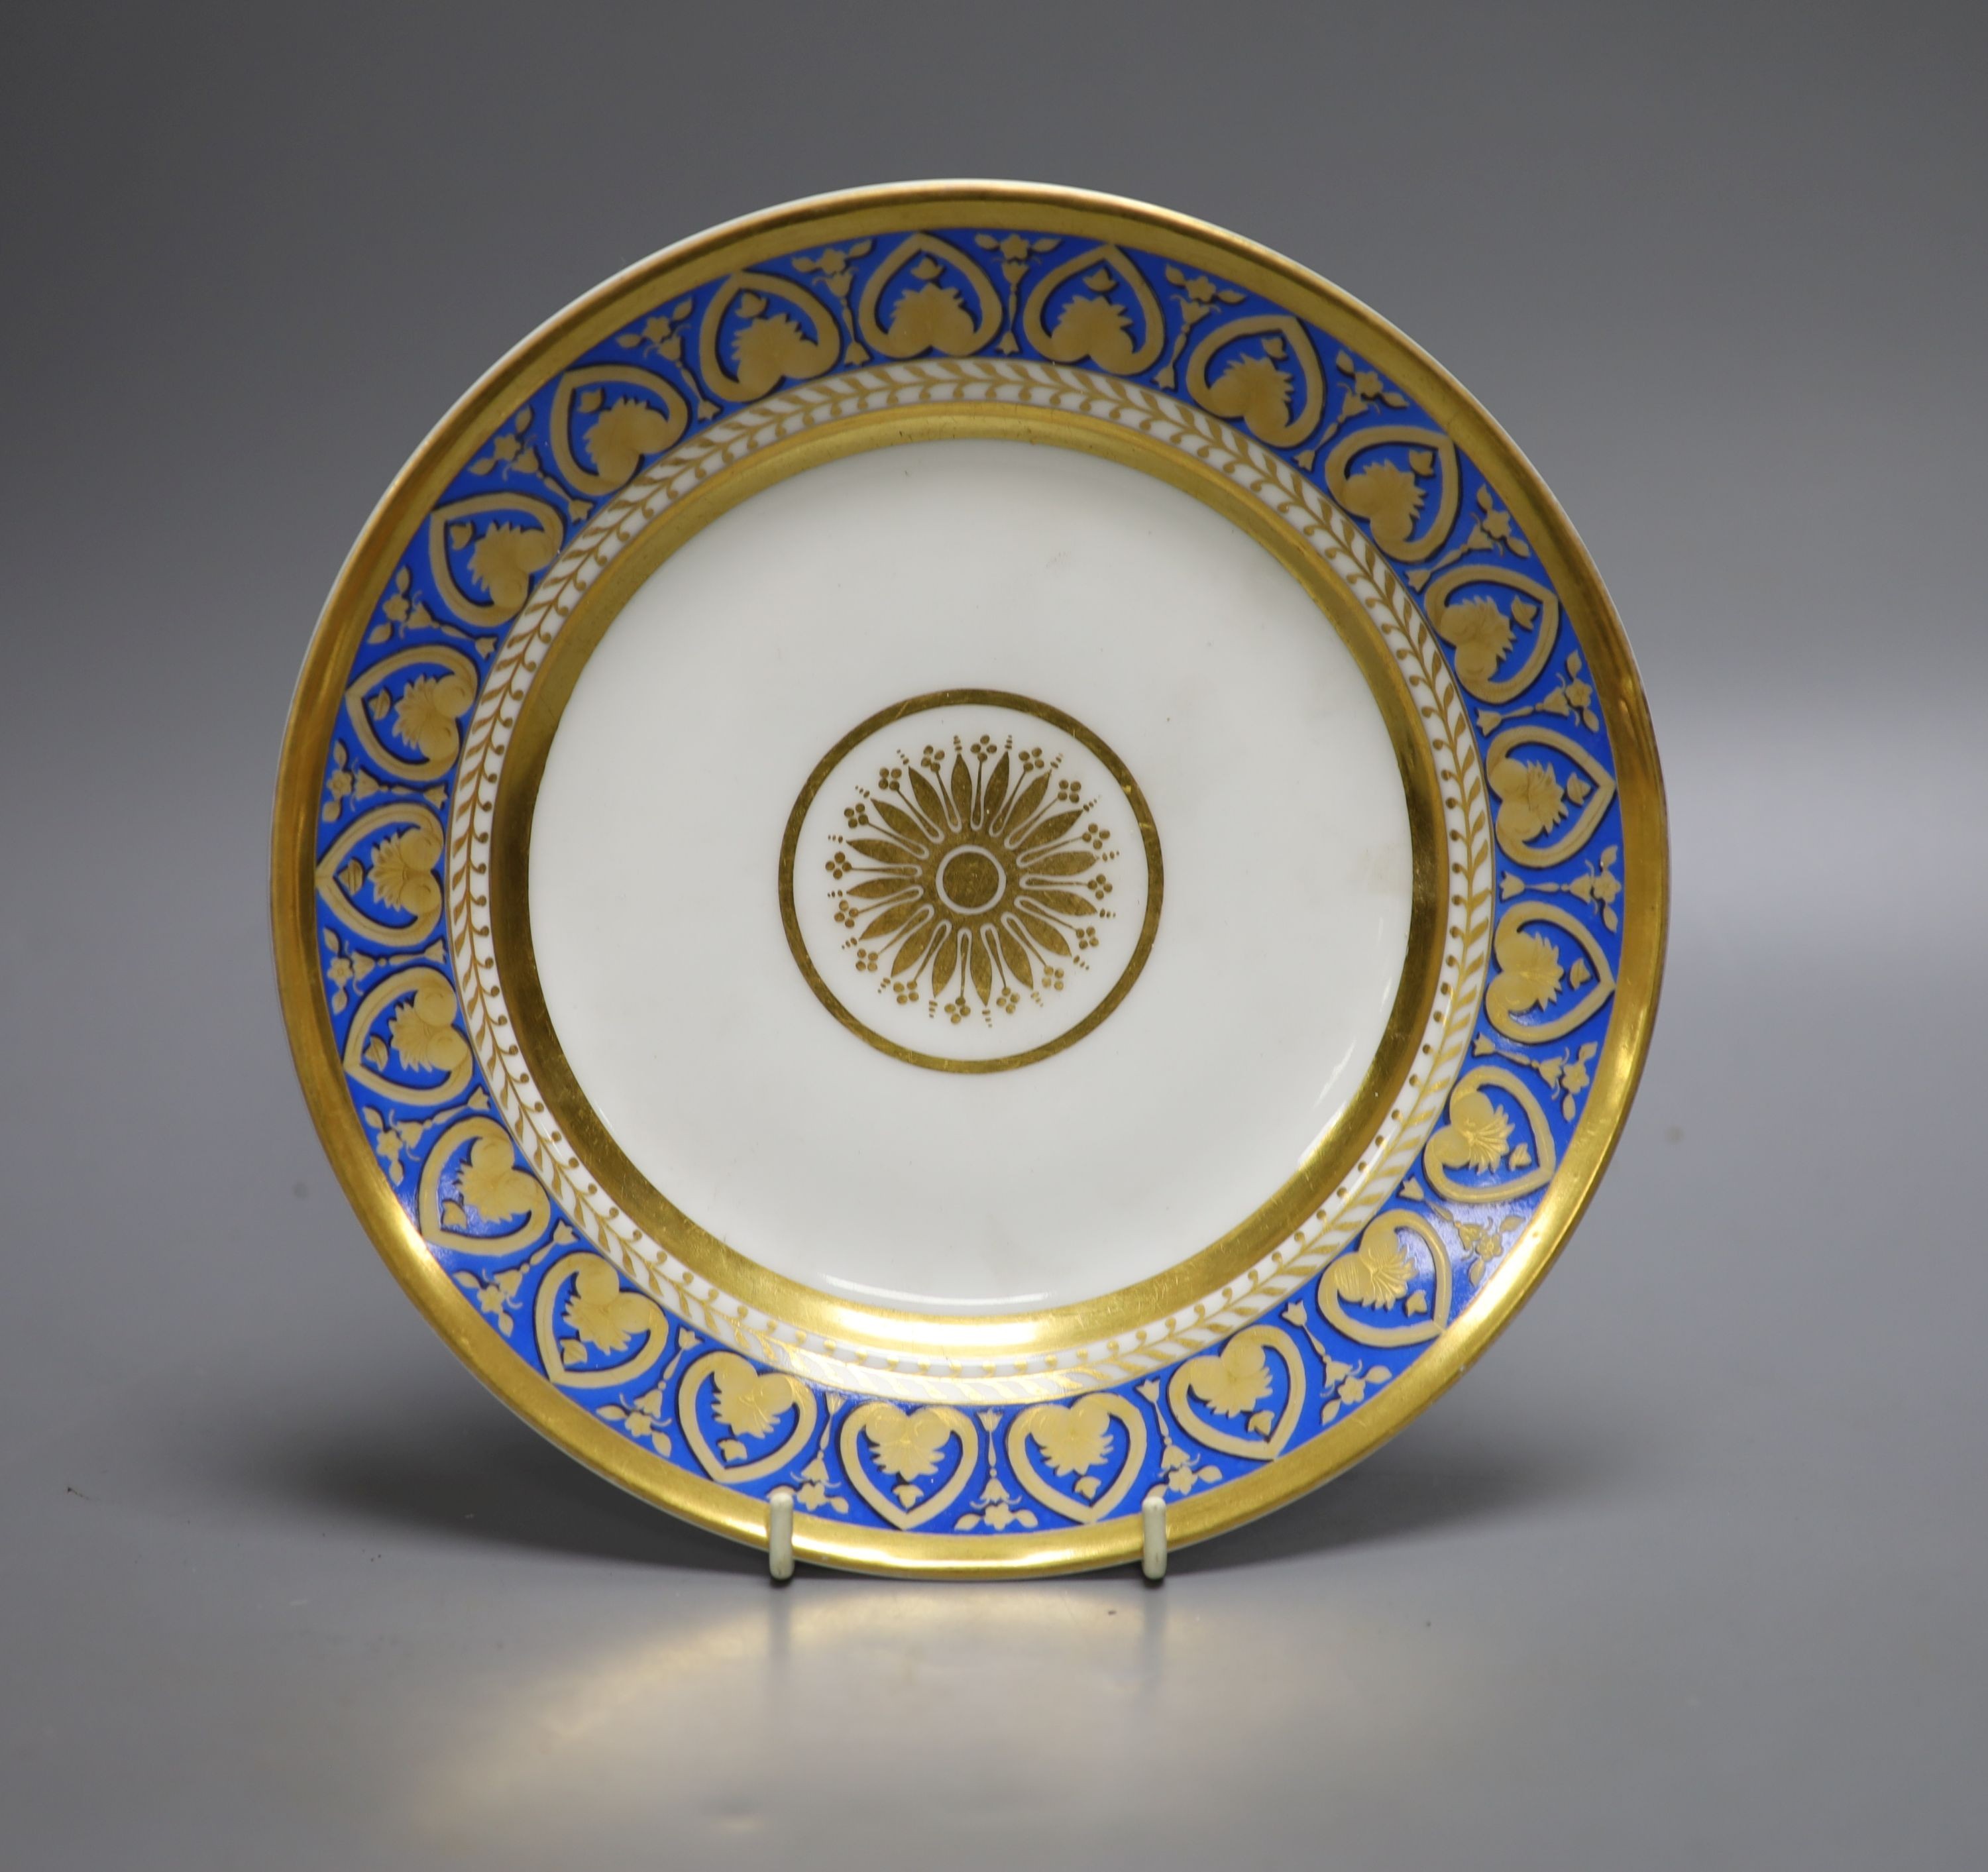 A RUSSIAN PORCELAIN PLATE IMPERIAL PORCELAIN FACTORY, PERIOD OF NICHOLAS II, In the style of the Ropsha service, with a border of gilt stylised palmettes on a blue ground dated 1912, 22cm